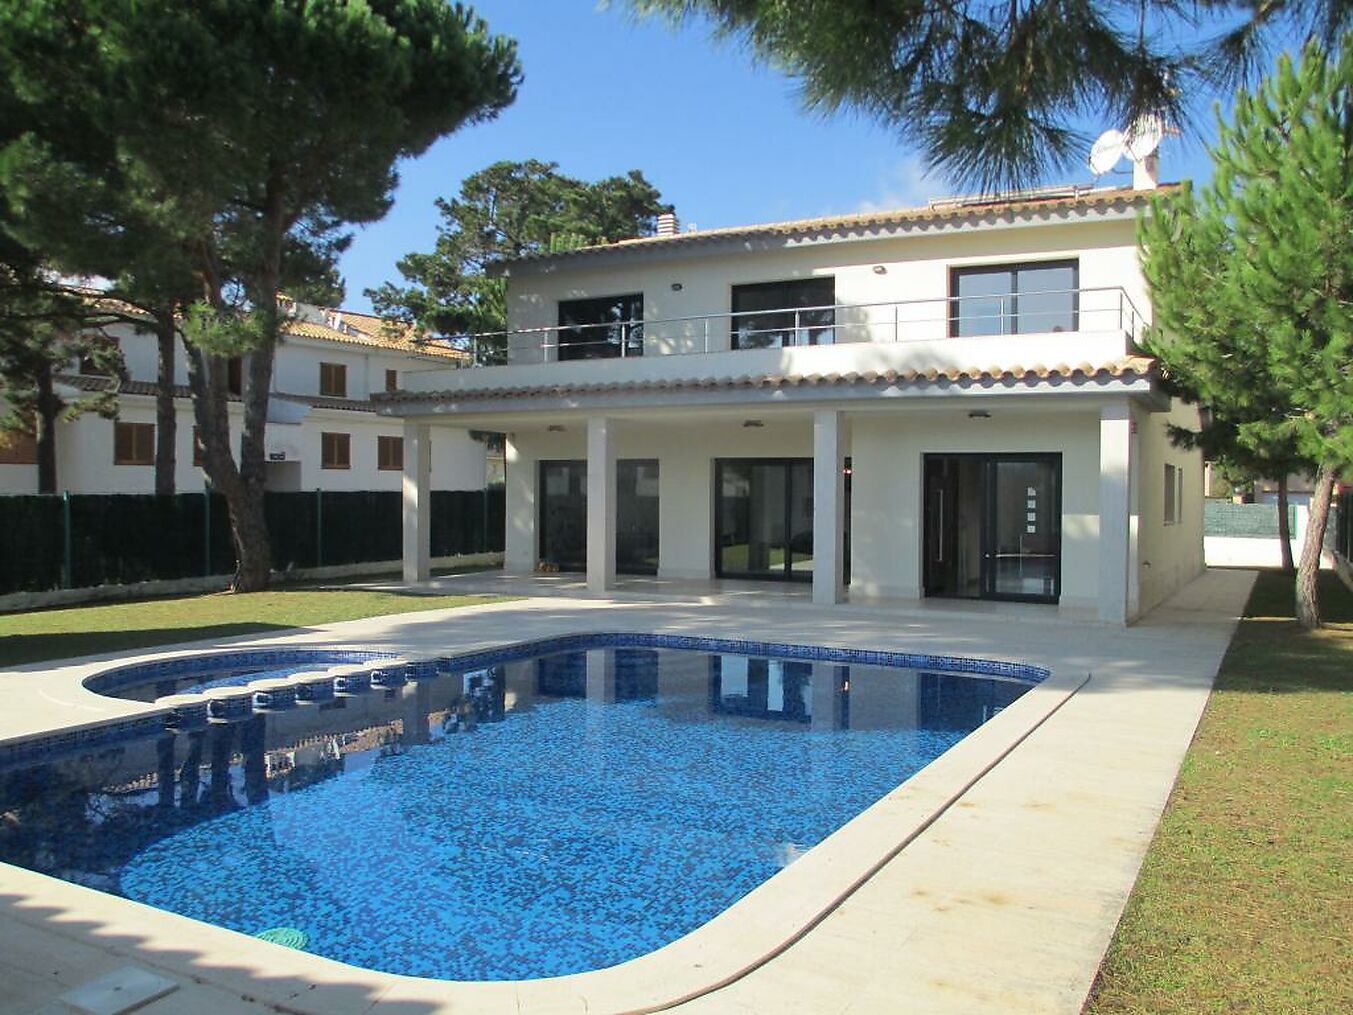 Modern Villa in the beautiful town of S'Agaró.